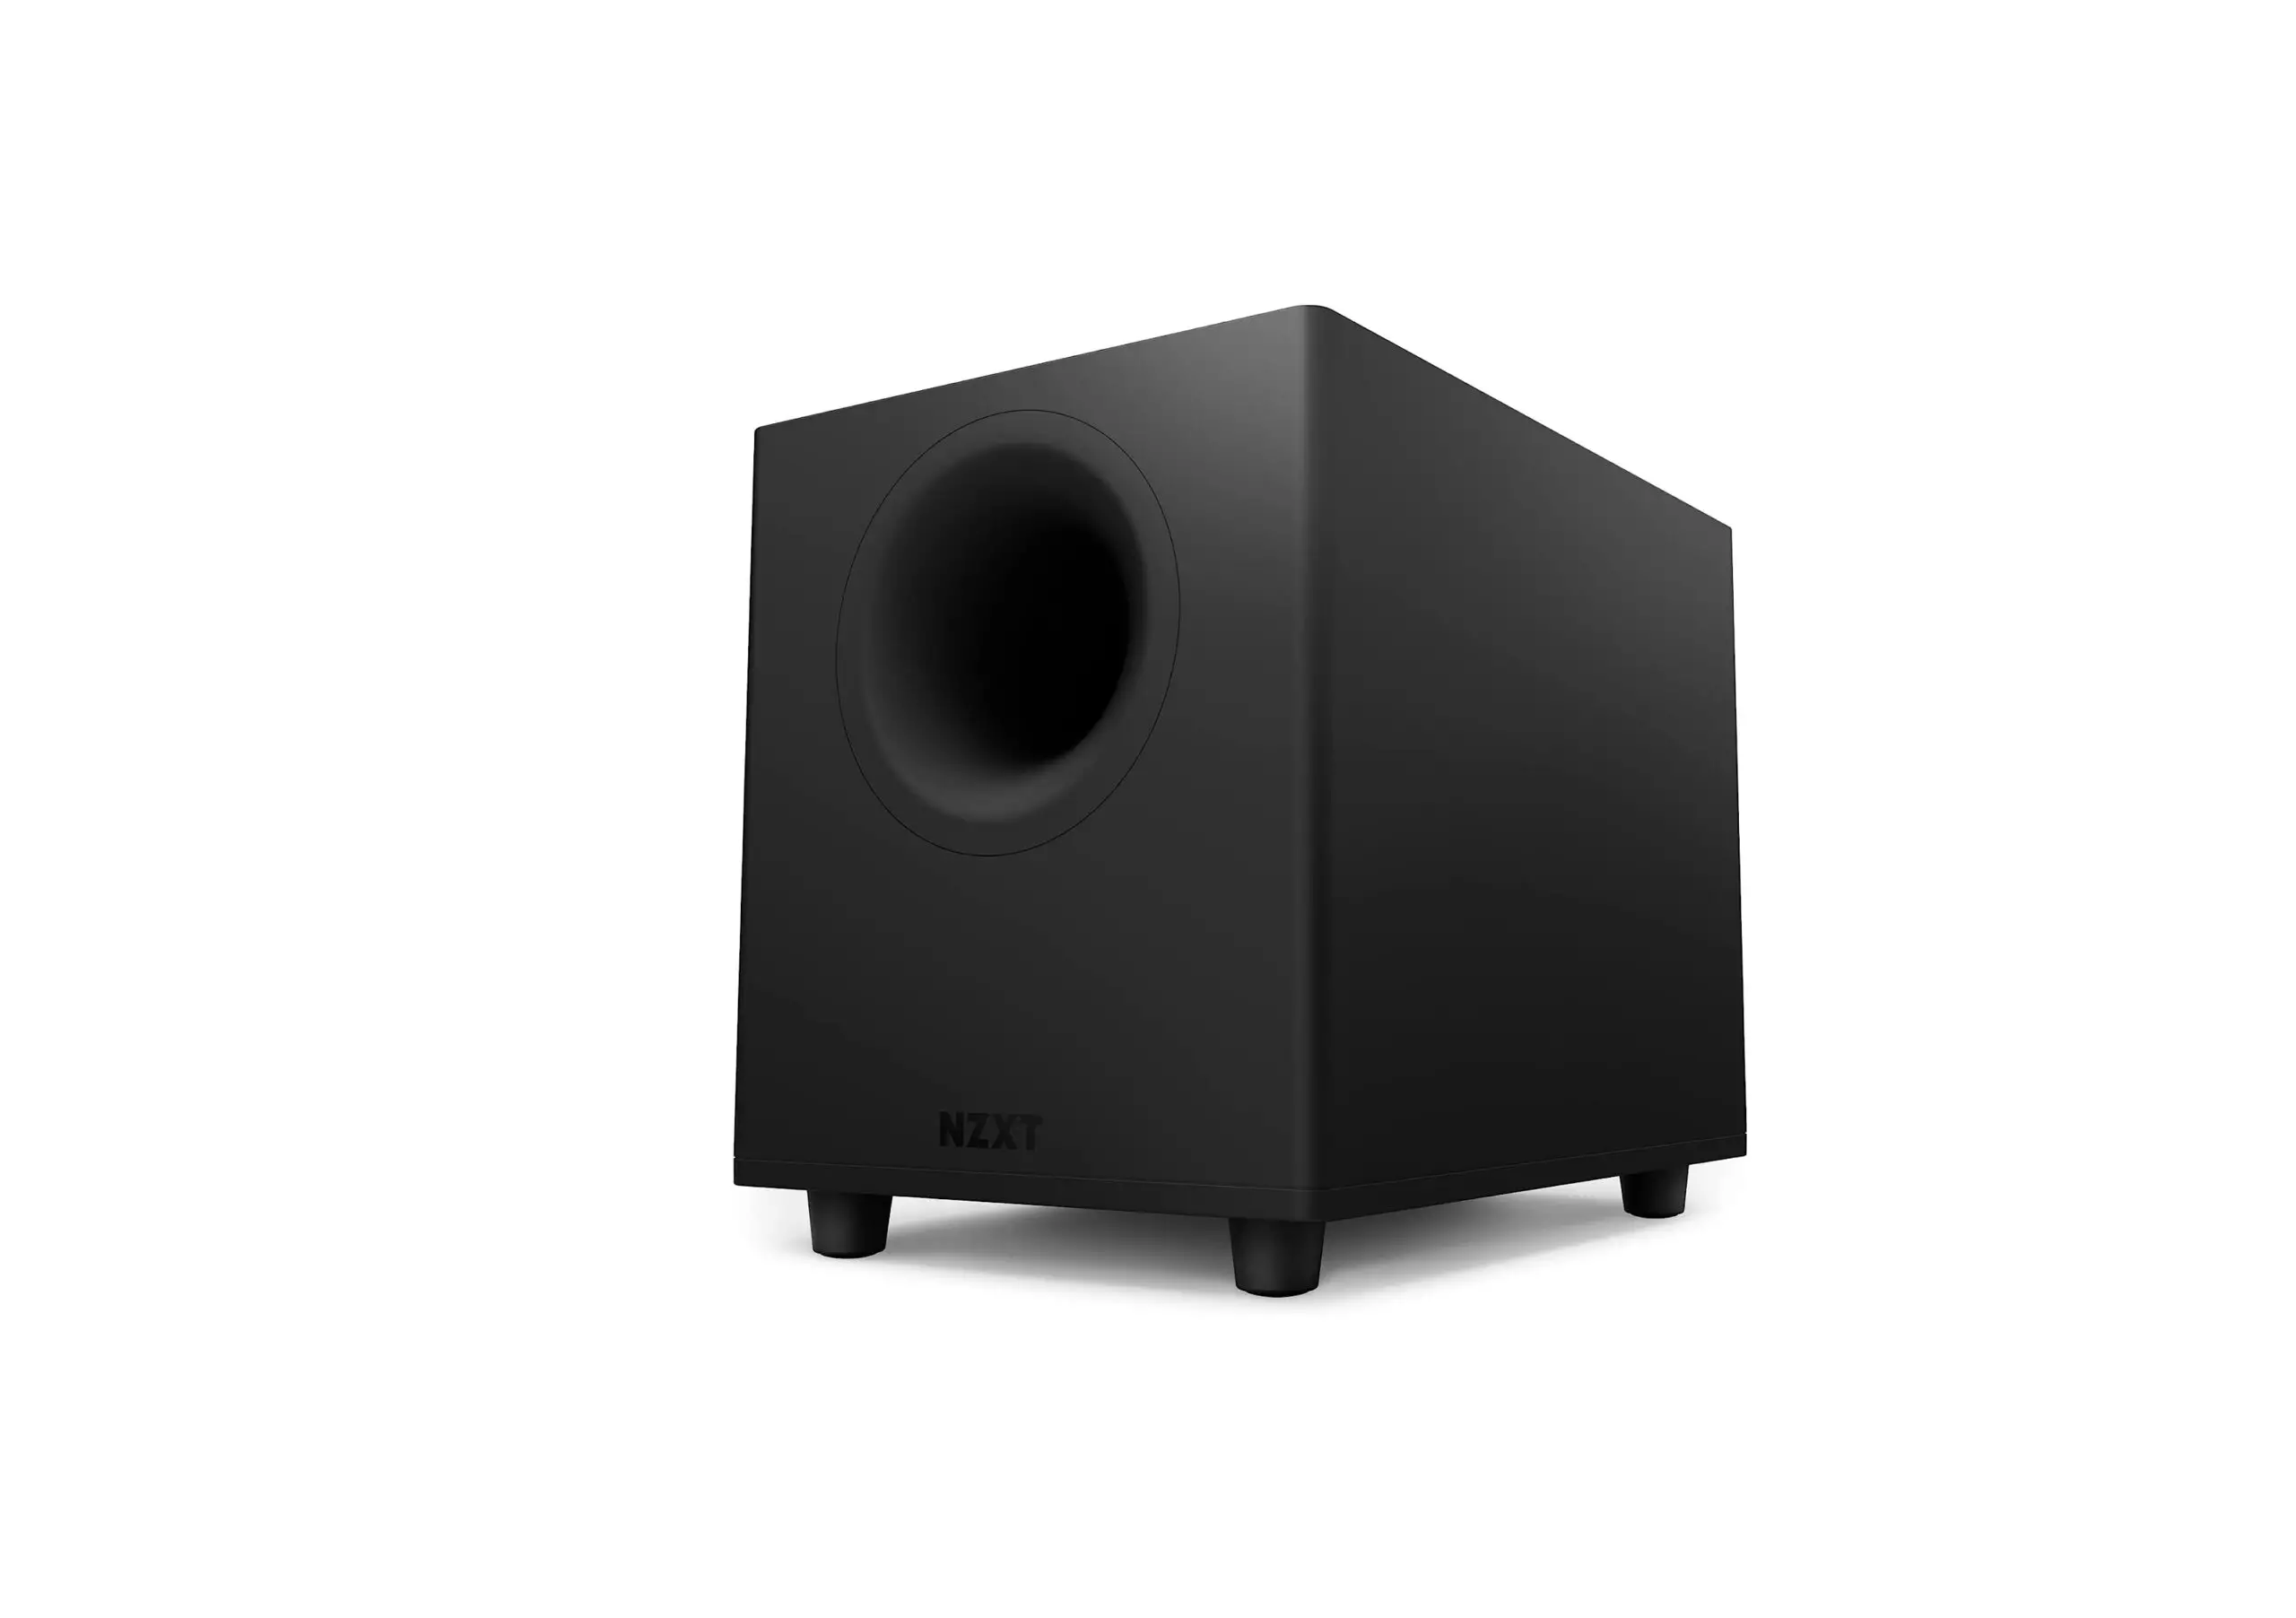 Relay Subwoofer Nzxt NegroRcaGaming AP-SUB80-US - NZXT